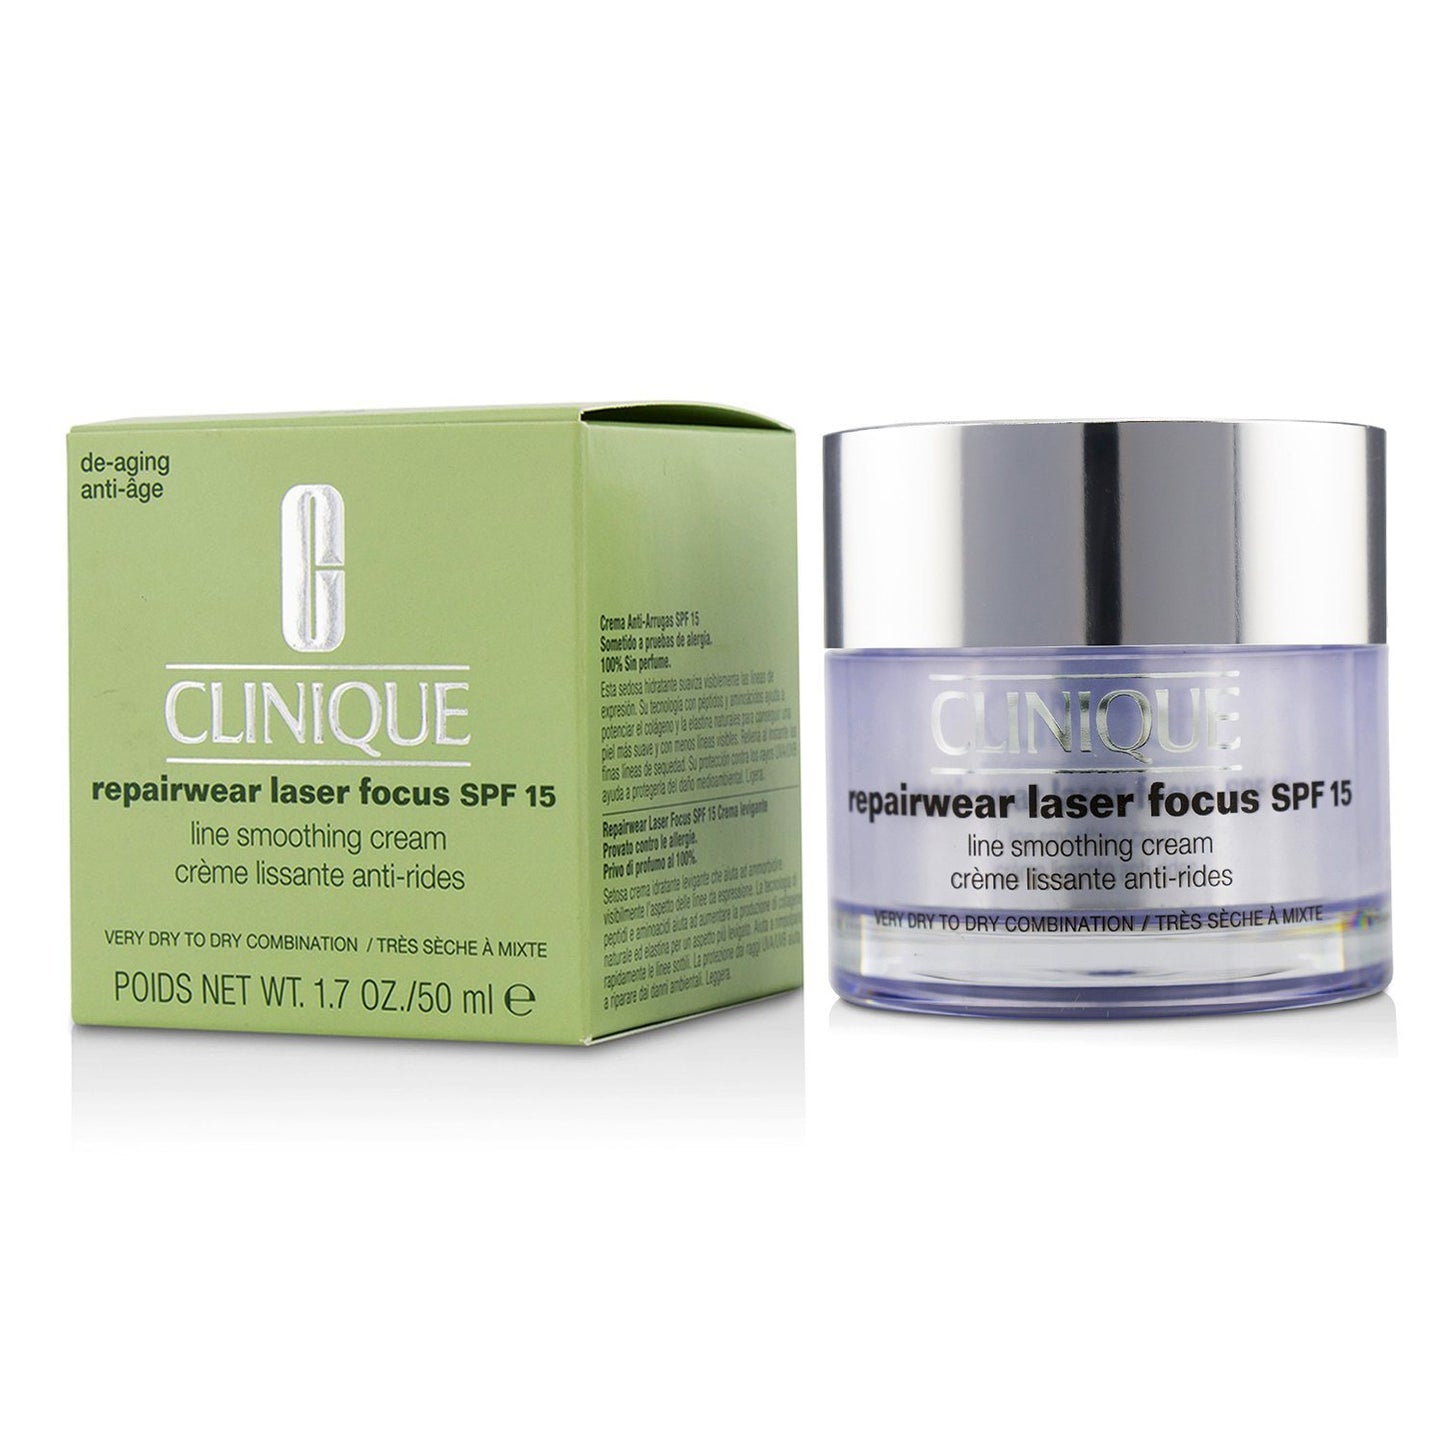 CLINIQUE - Repairwear Laser Focus Line Smoothing Cream SPF 15 - Very Dry To Dry Combination ZK50 50ml/1.7oz